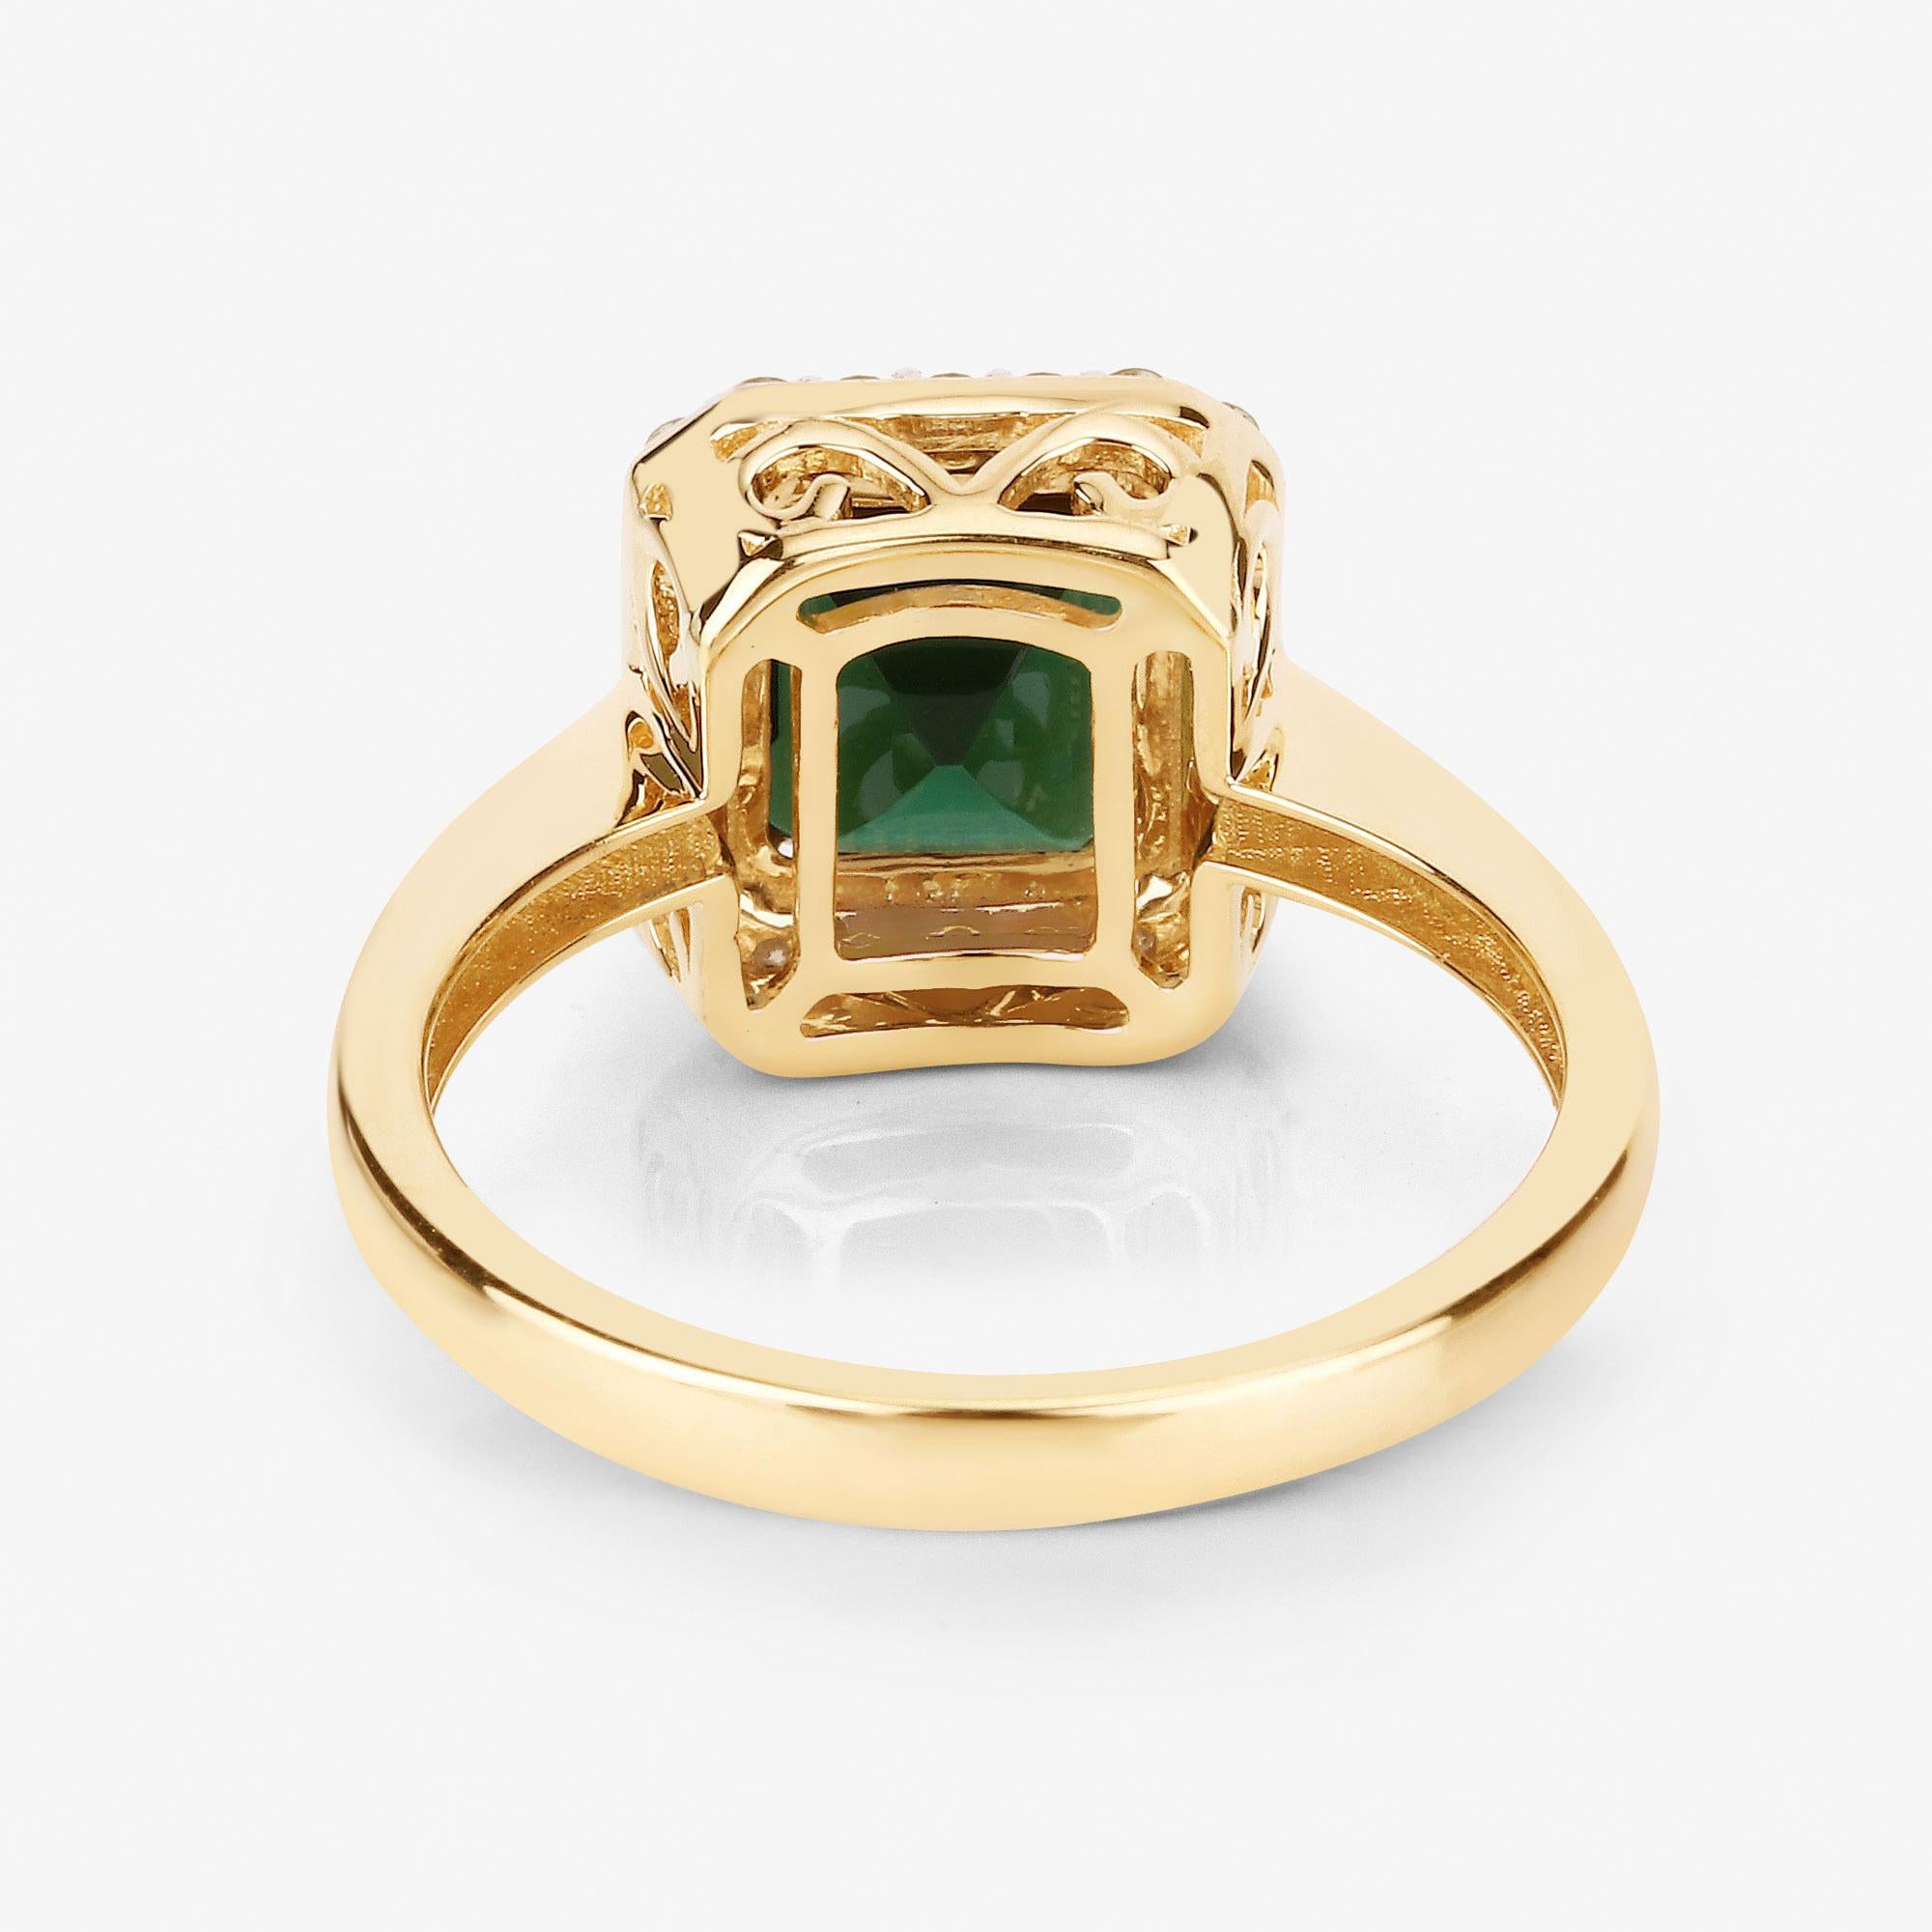 Women's or Men's Green Tourmaline Ring With Diamonds 3.02 Carats 14K Yellow Gold For Sale